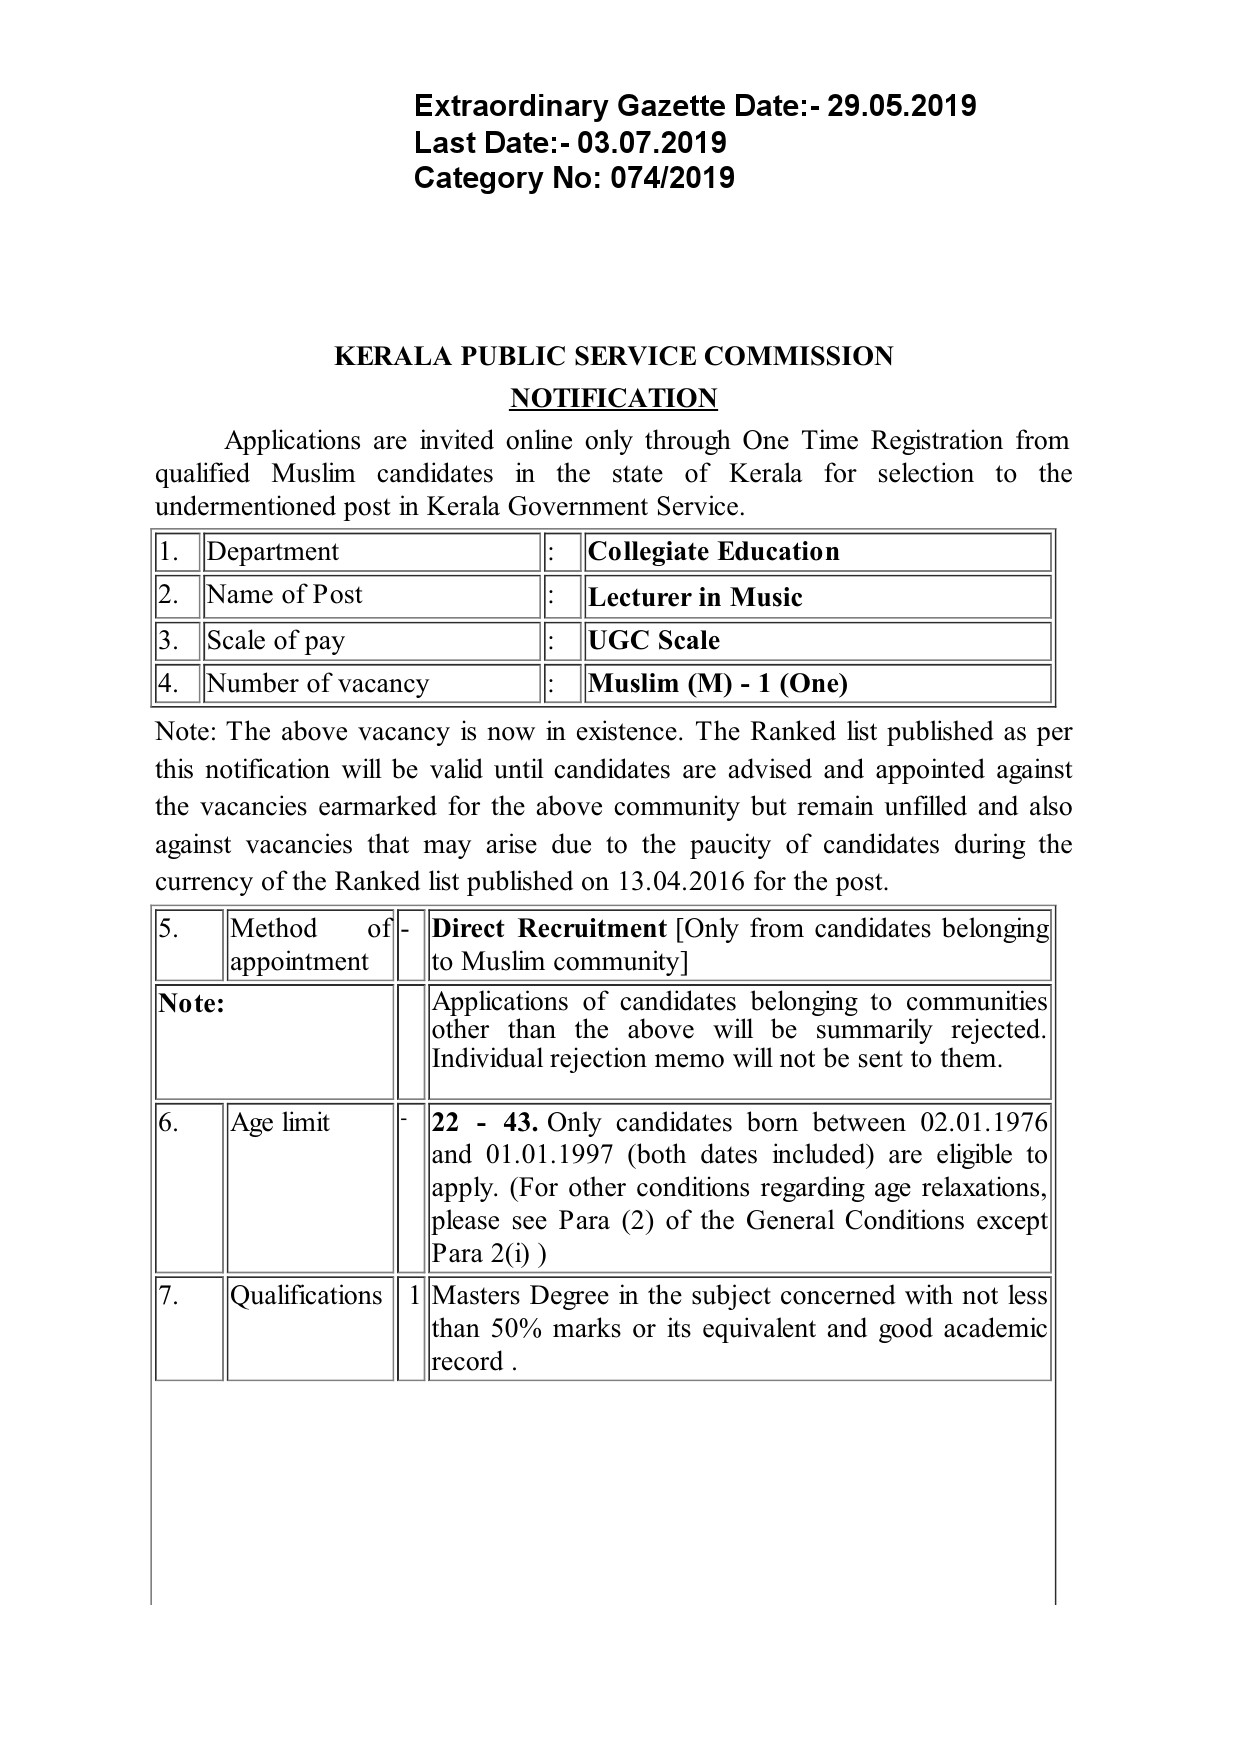 KPSC Lecturer in Lecturer in Music from Muslims - Notification Image 1